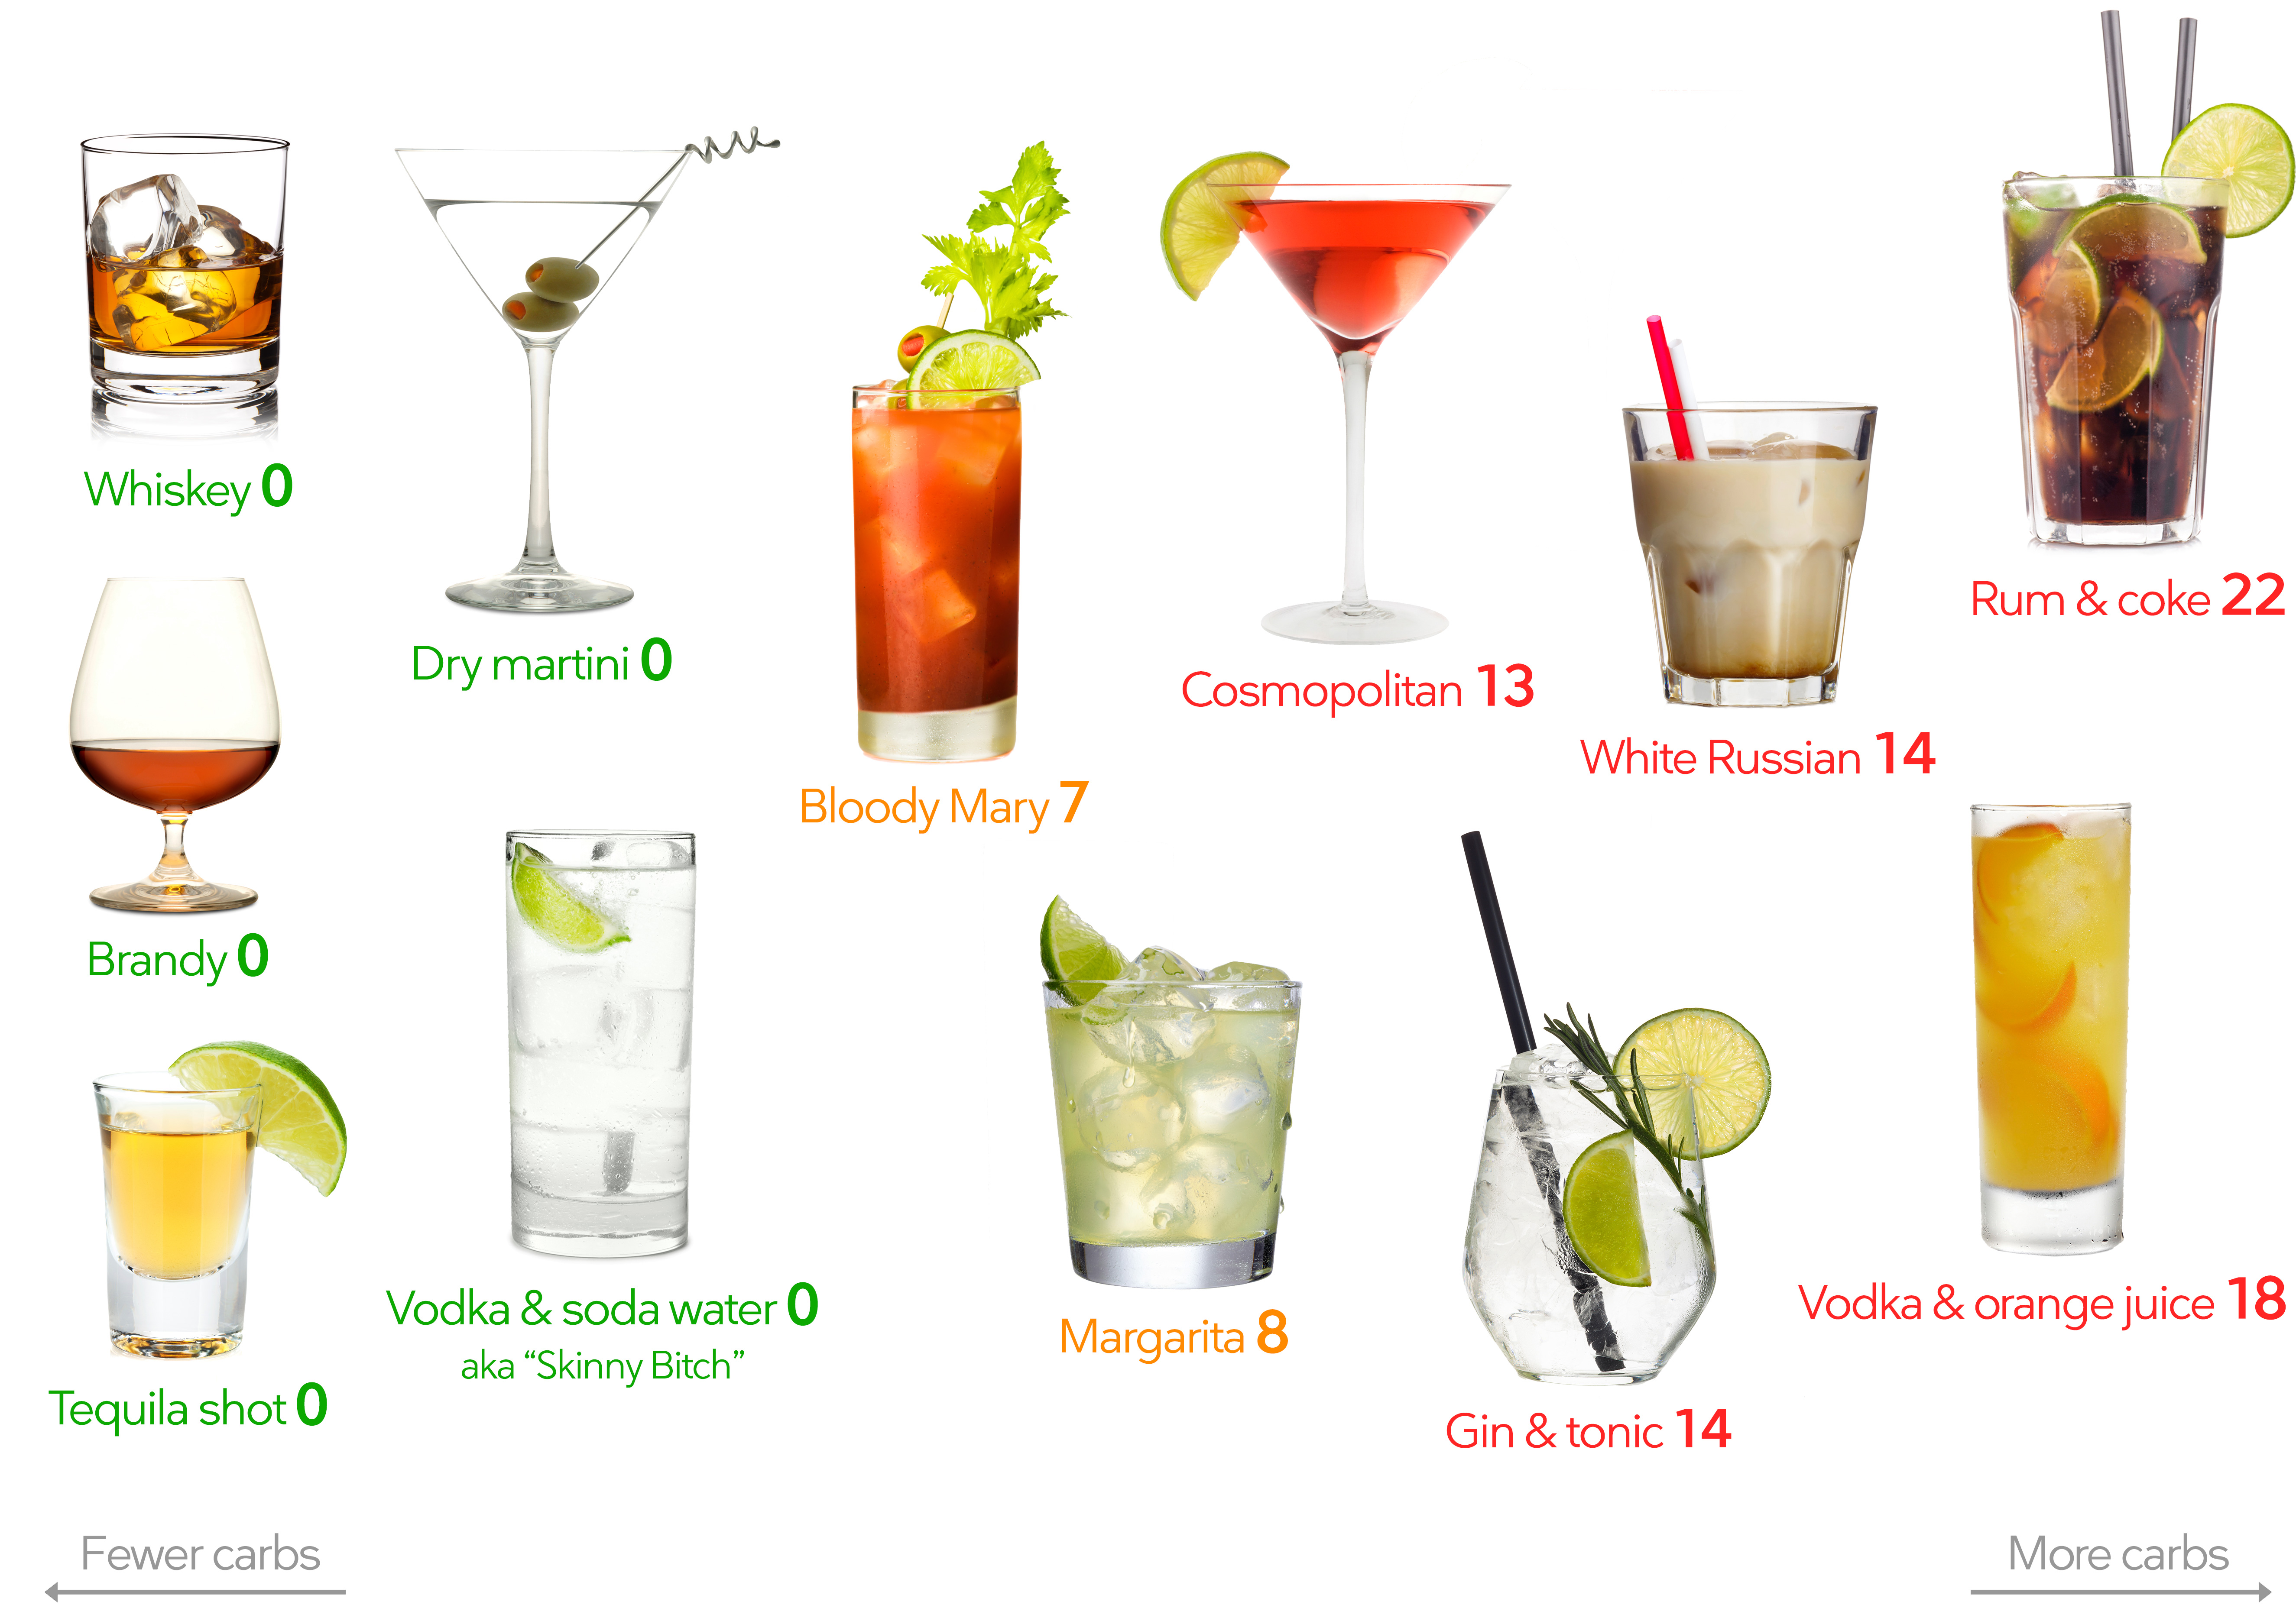 Calories From Alcohol Chart